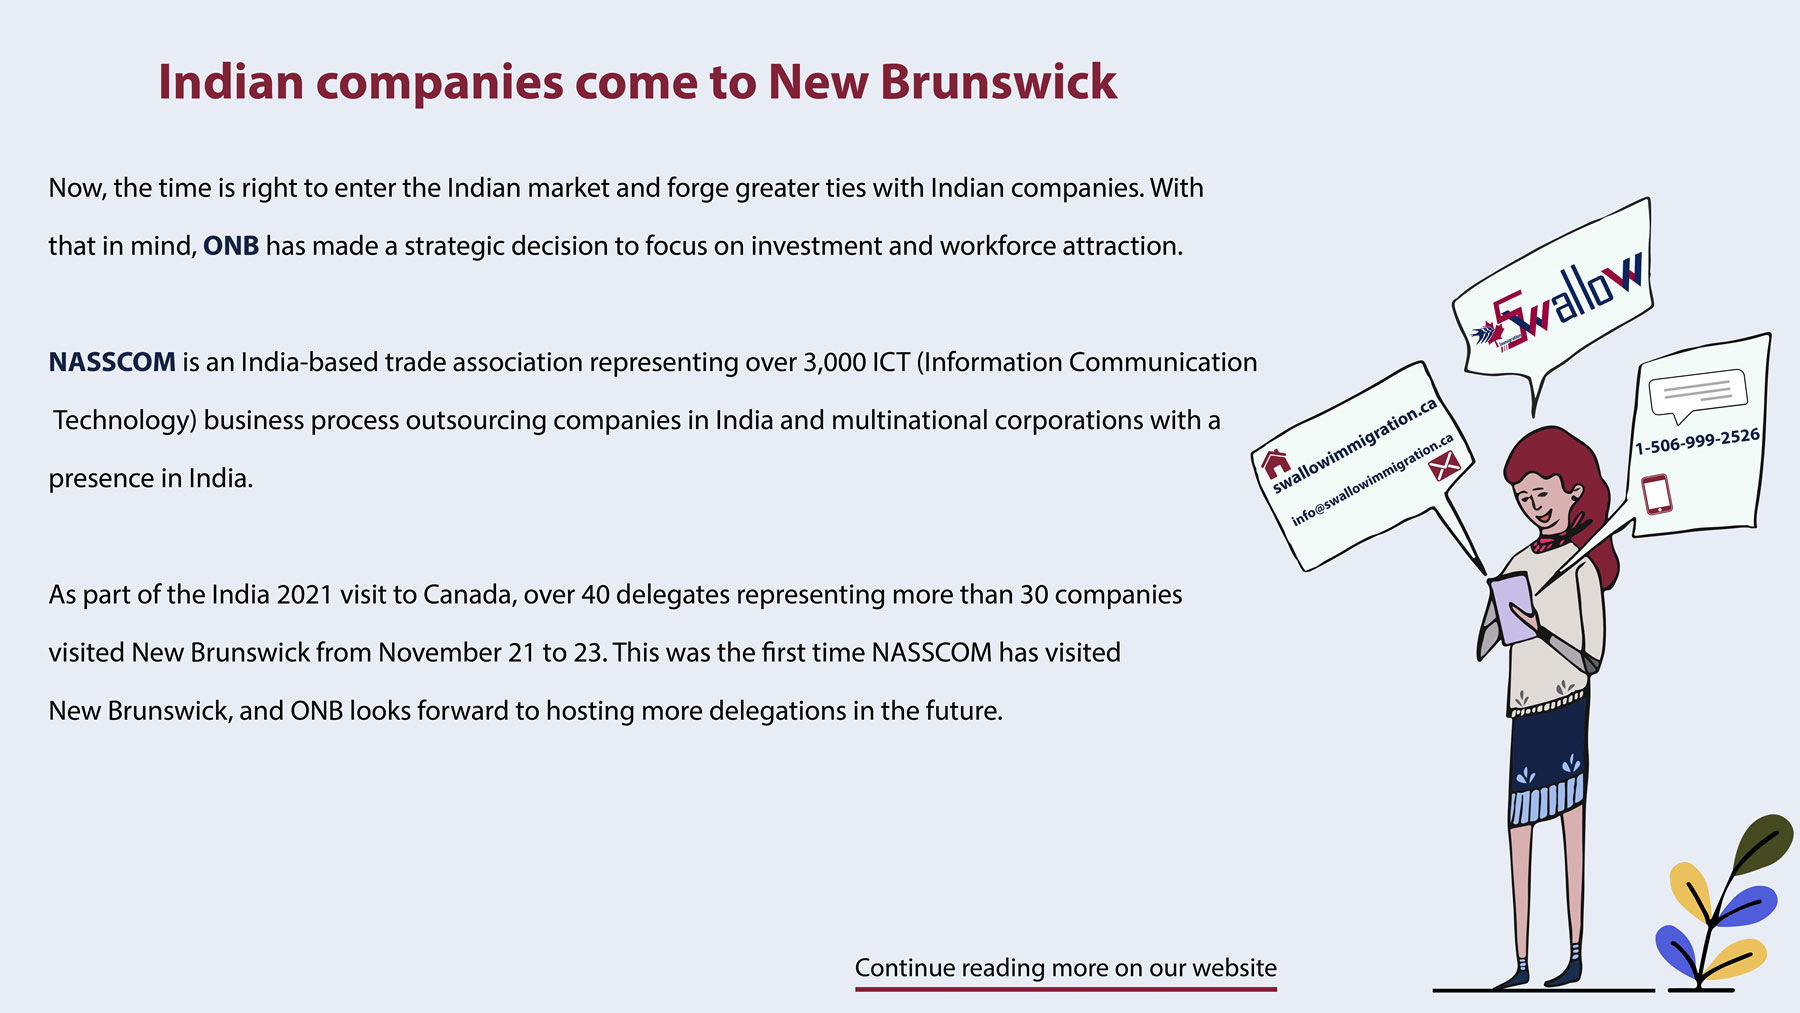 Indian companies come to New Brunswick